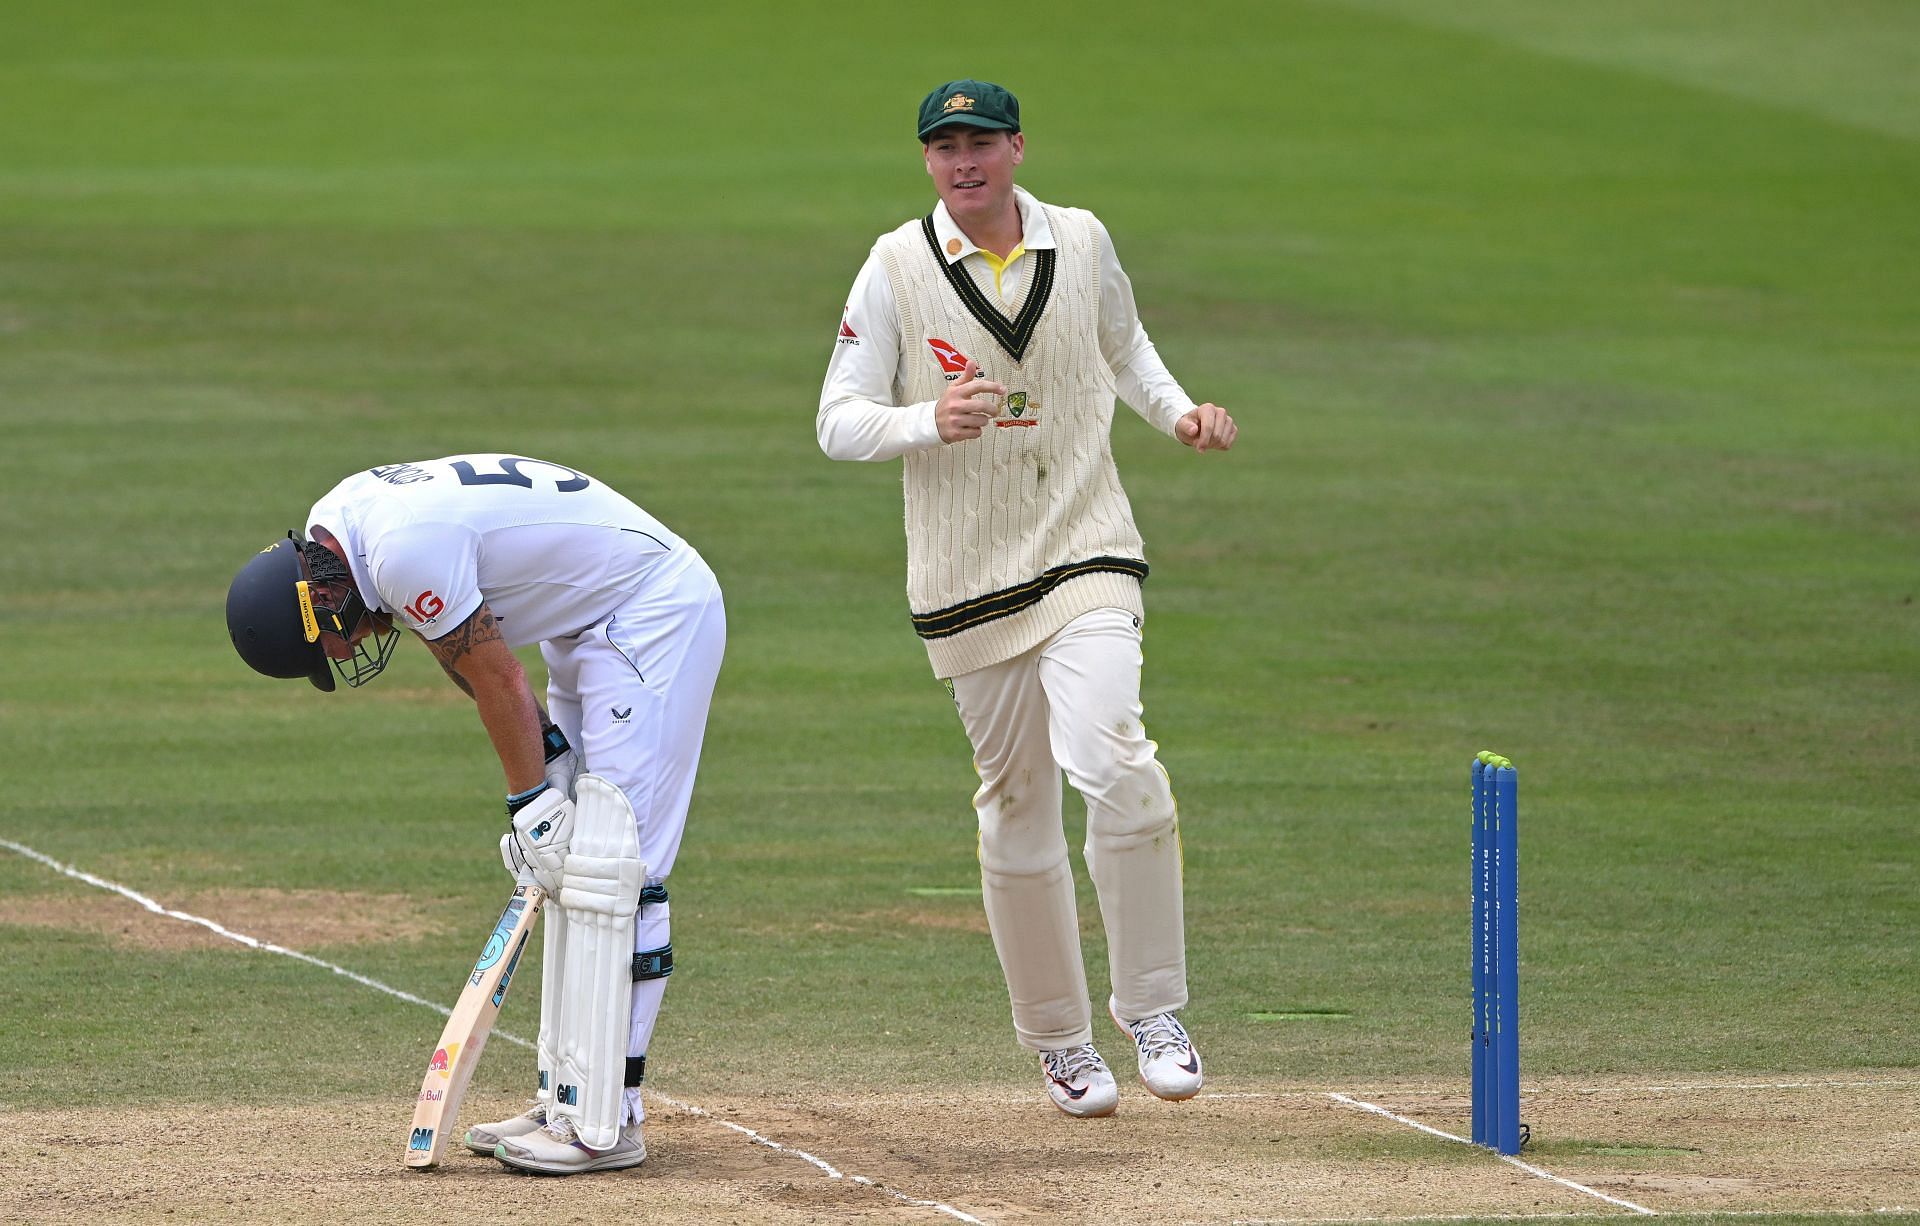 Ben Stokes was extremely disappointed when he failed to take England across the line.